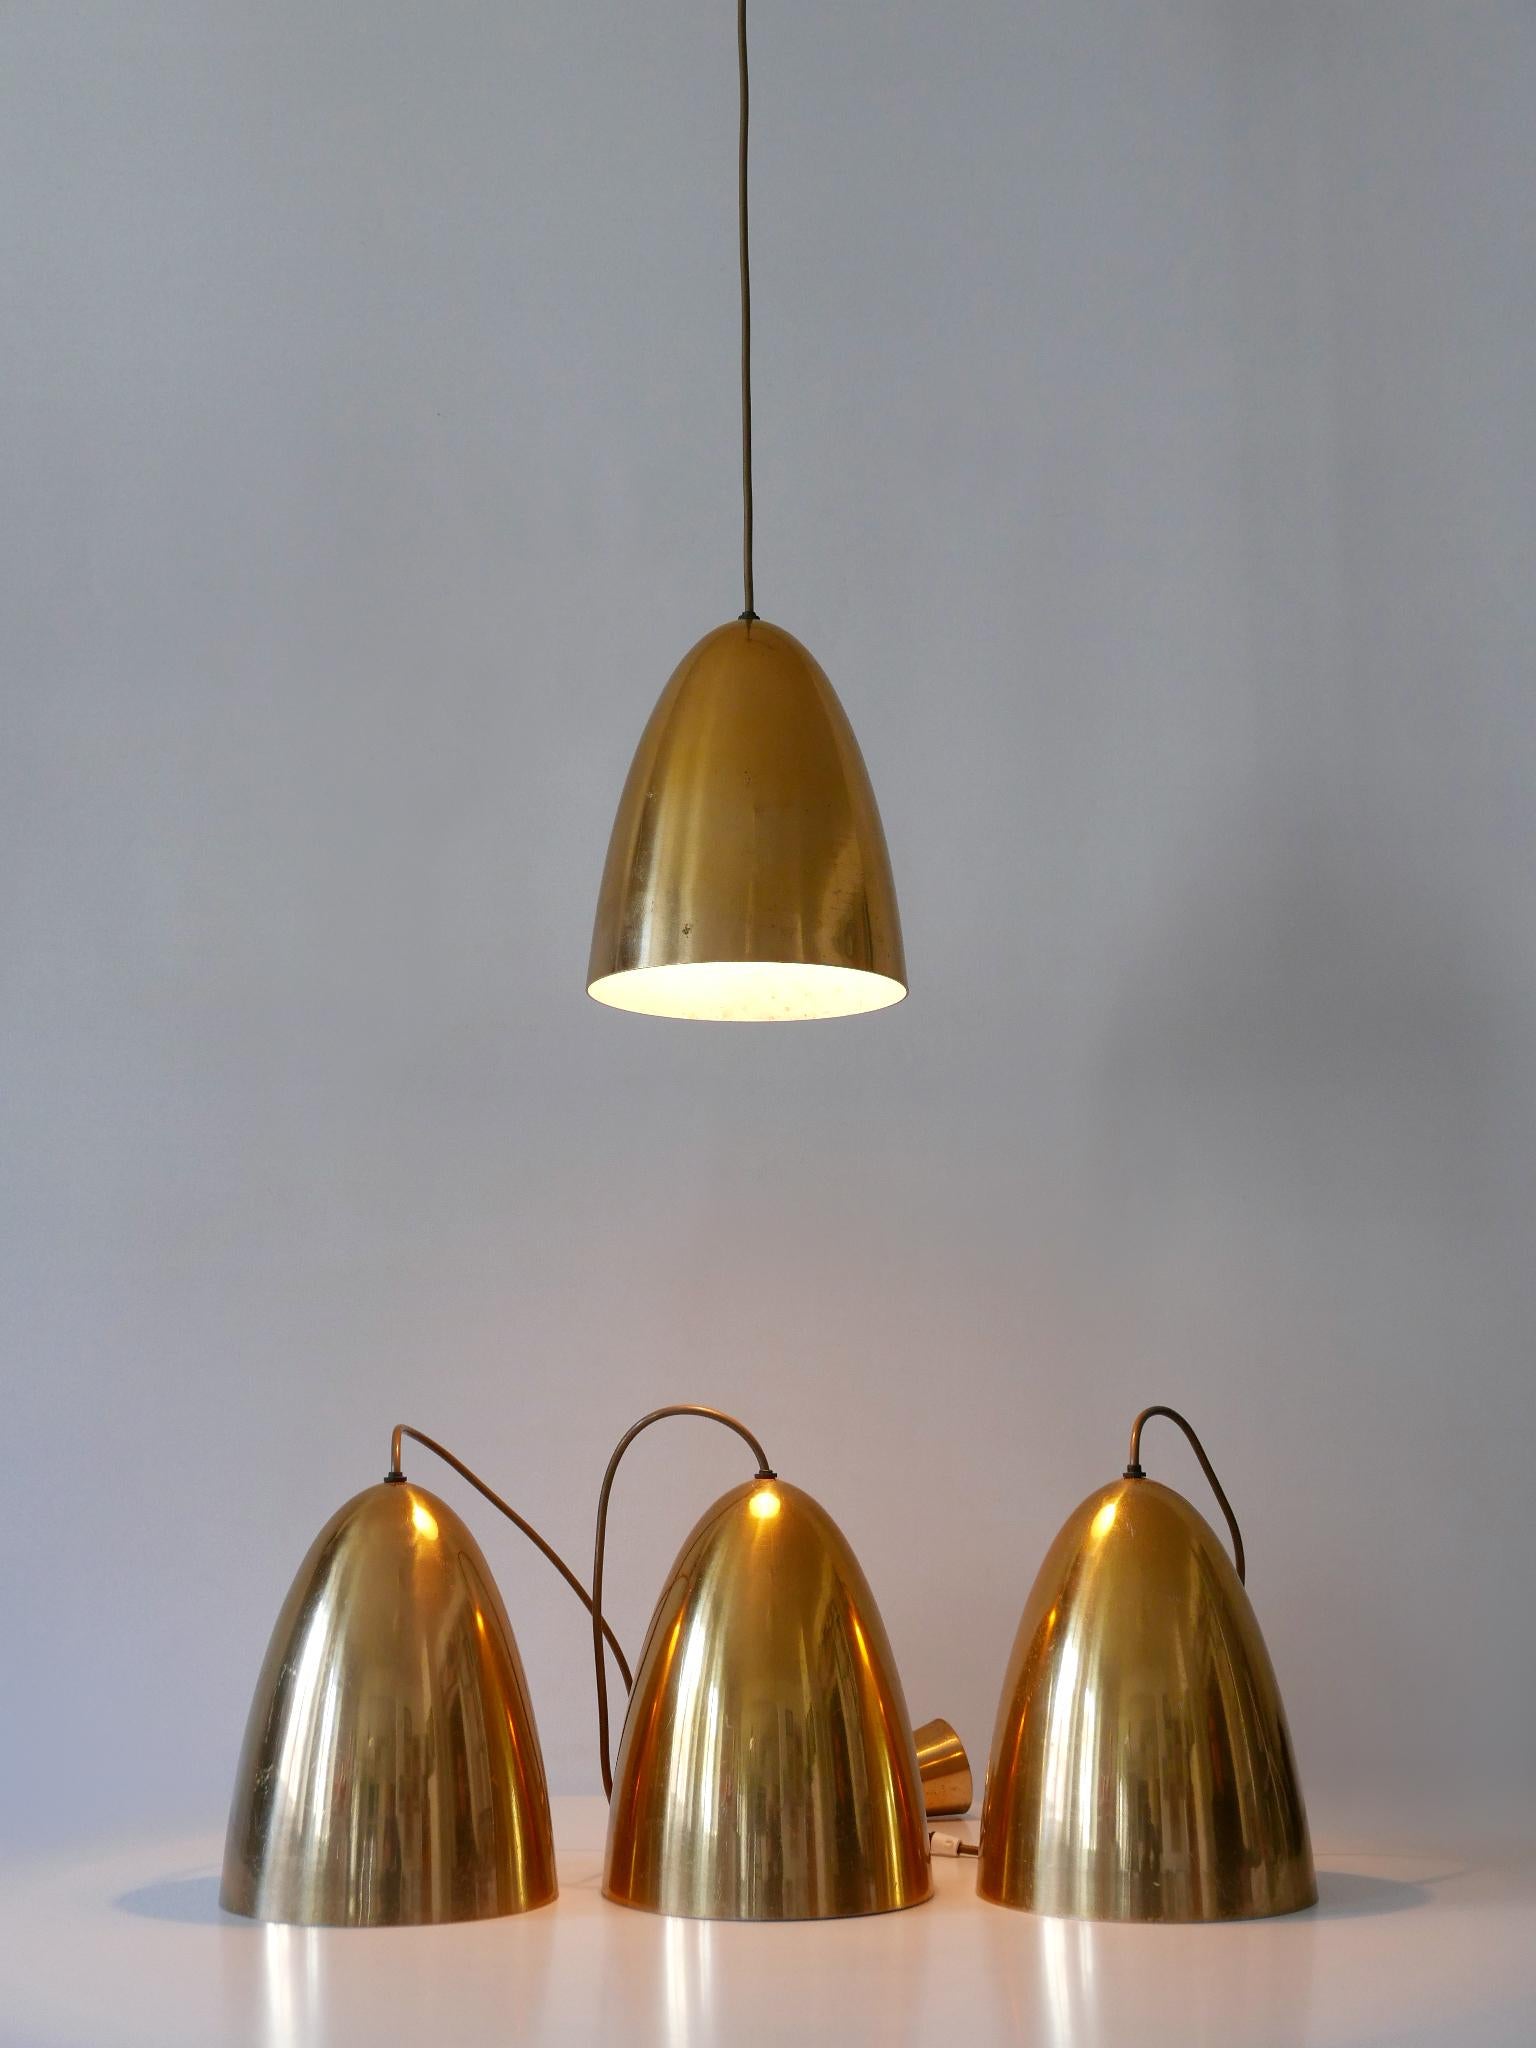 1 of 4 Elegant Mid Century Modern Pendant Lamps or Hanging Lights Germany 1950s For Sale 5